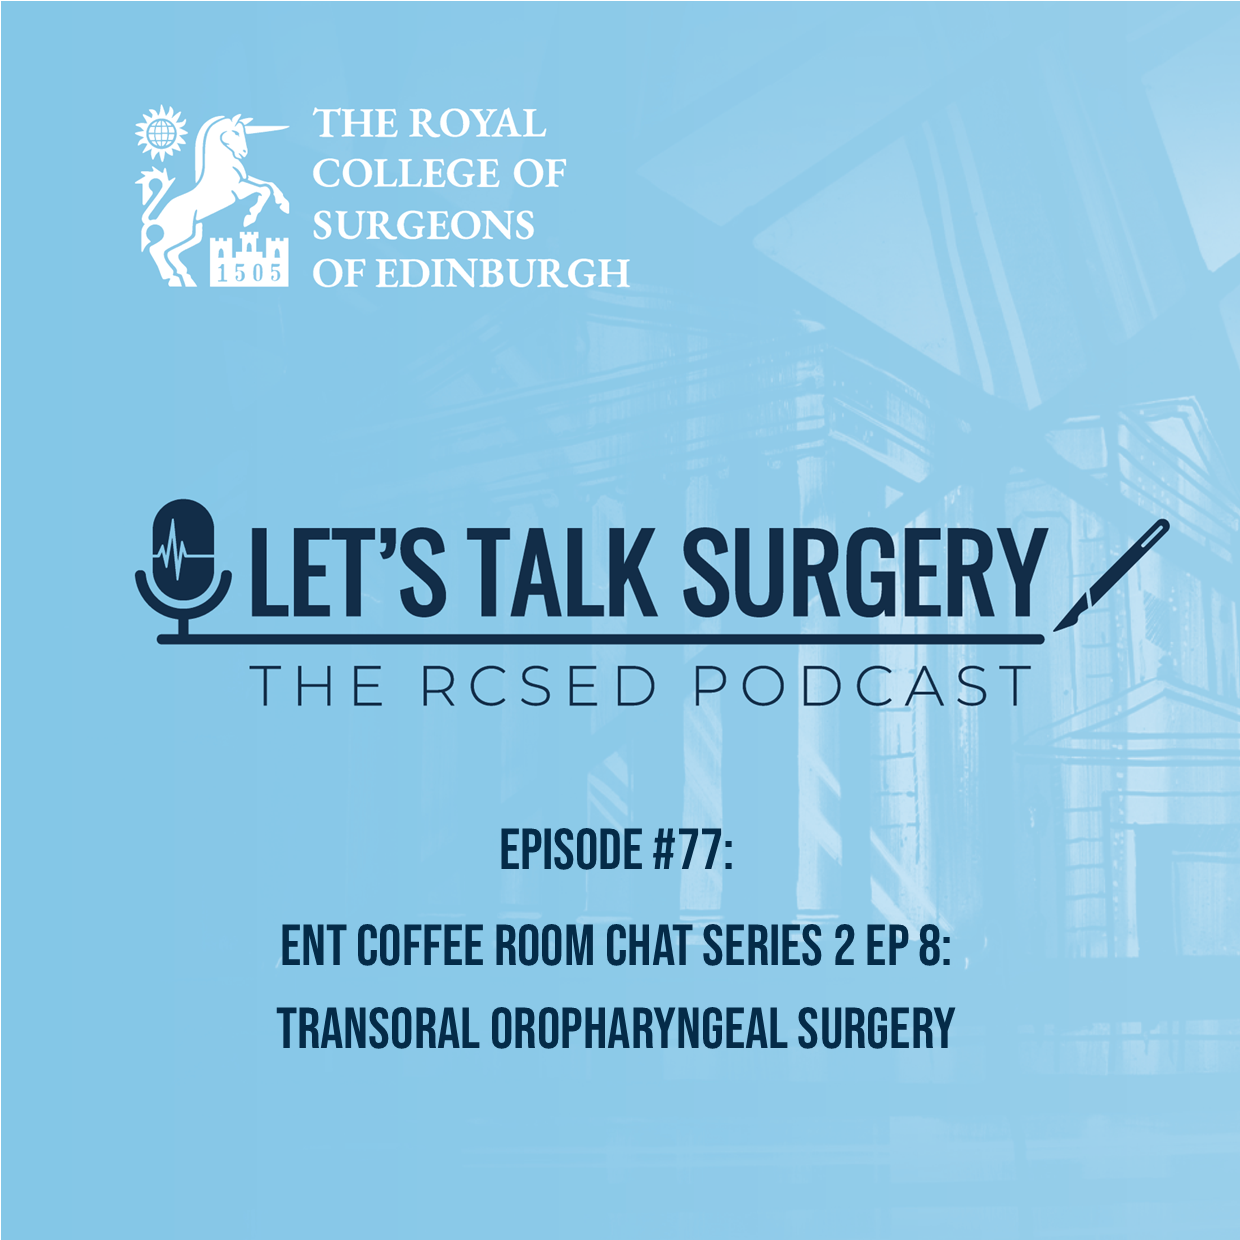 ENT Coffee Room Chat Series 2: Ep 8 - Transoral Oropharyngeal Surgery